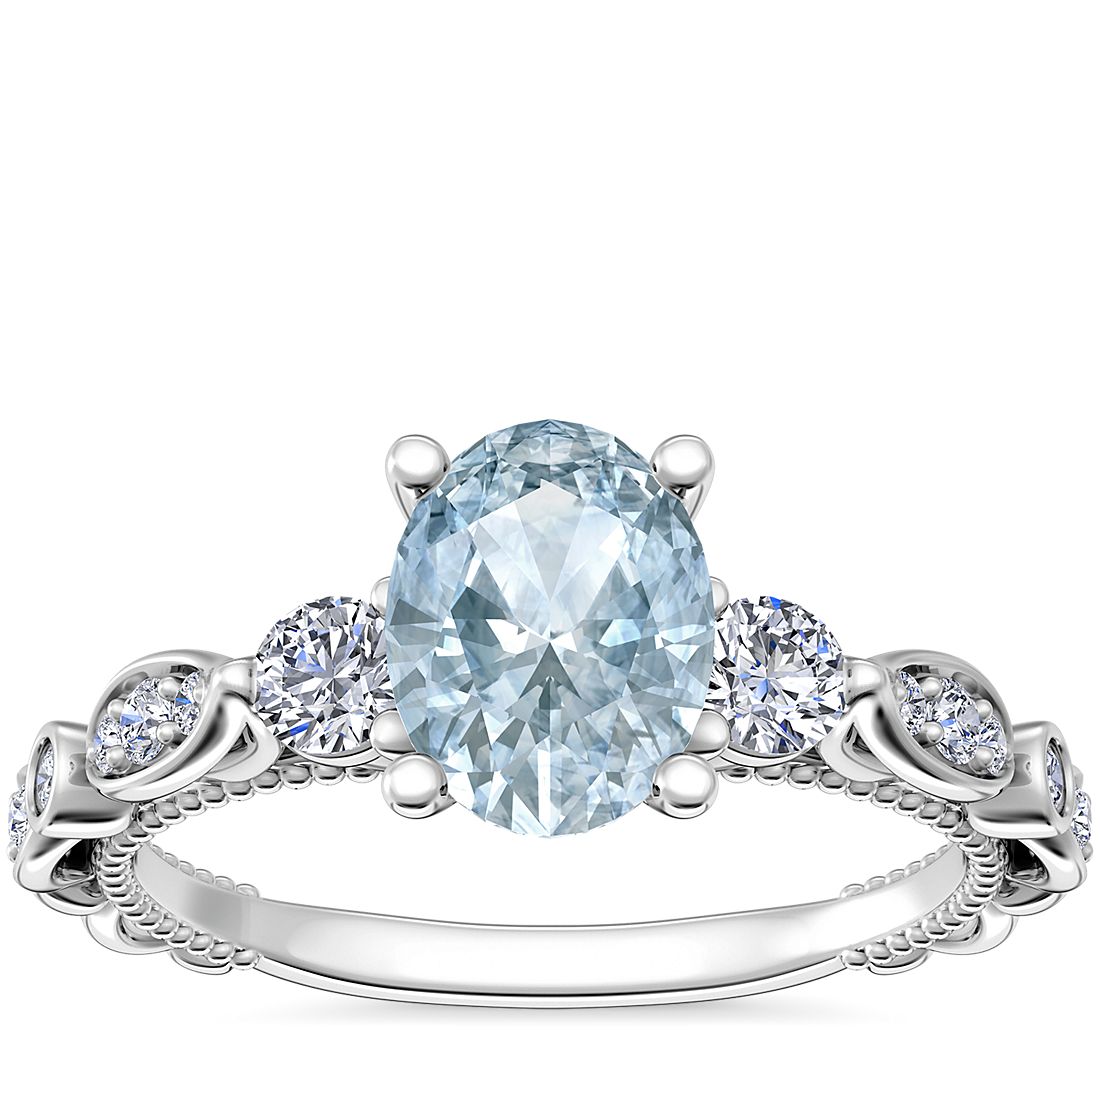 Floral Ellipse Diamond Cathedral Engagement Ring with Oval Aquamarine in 14k White Gold (8x6mm)